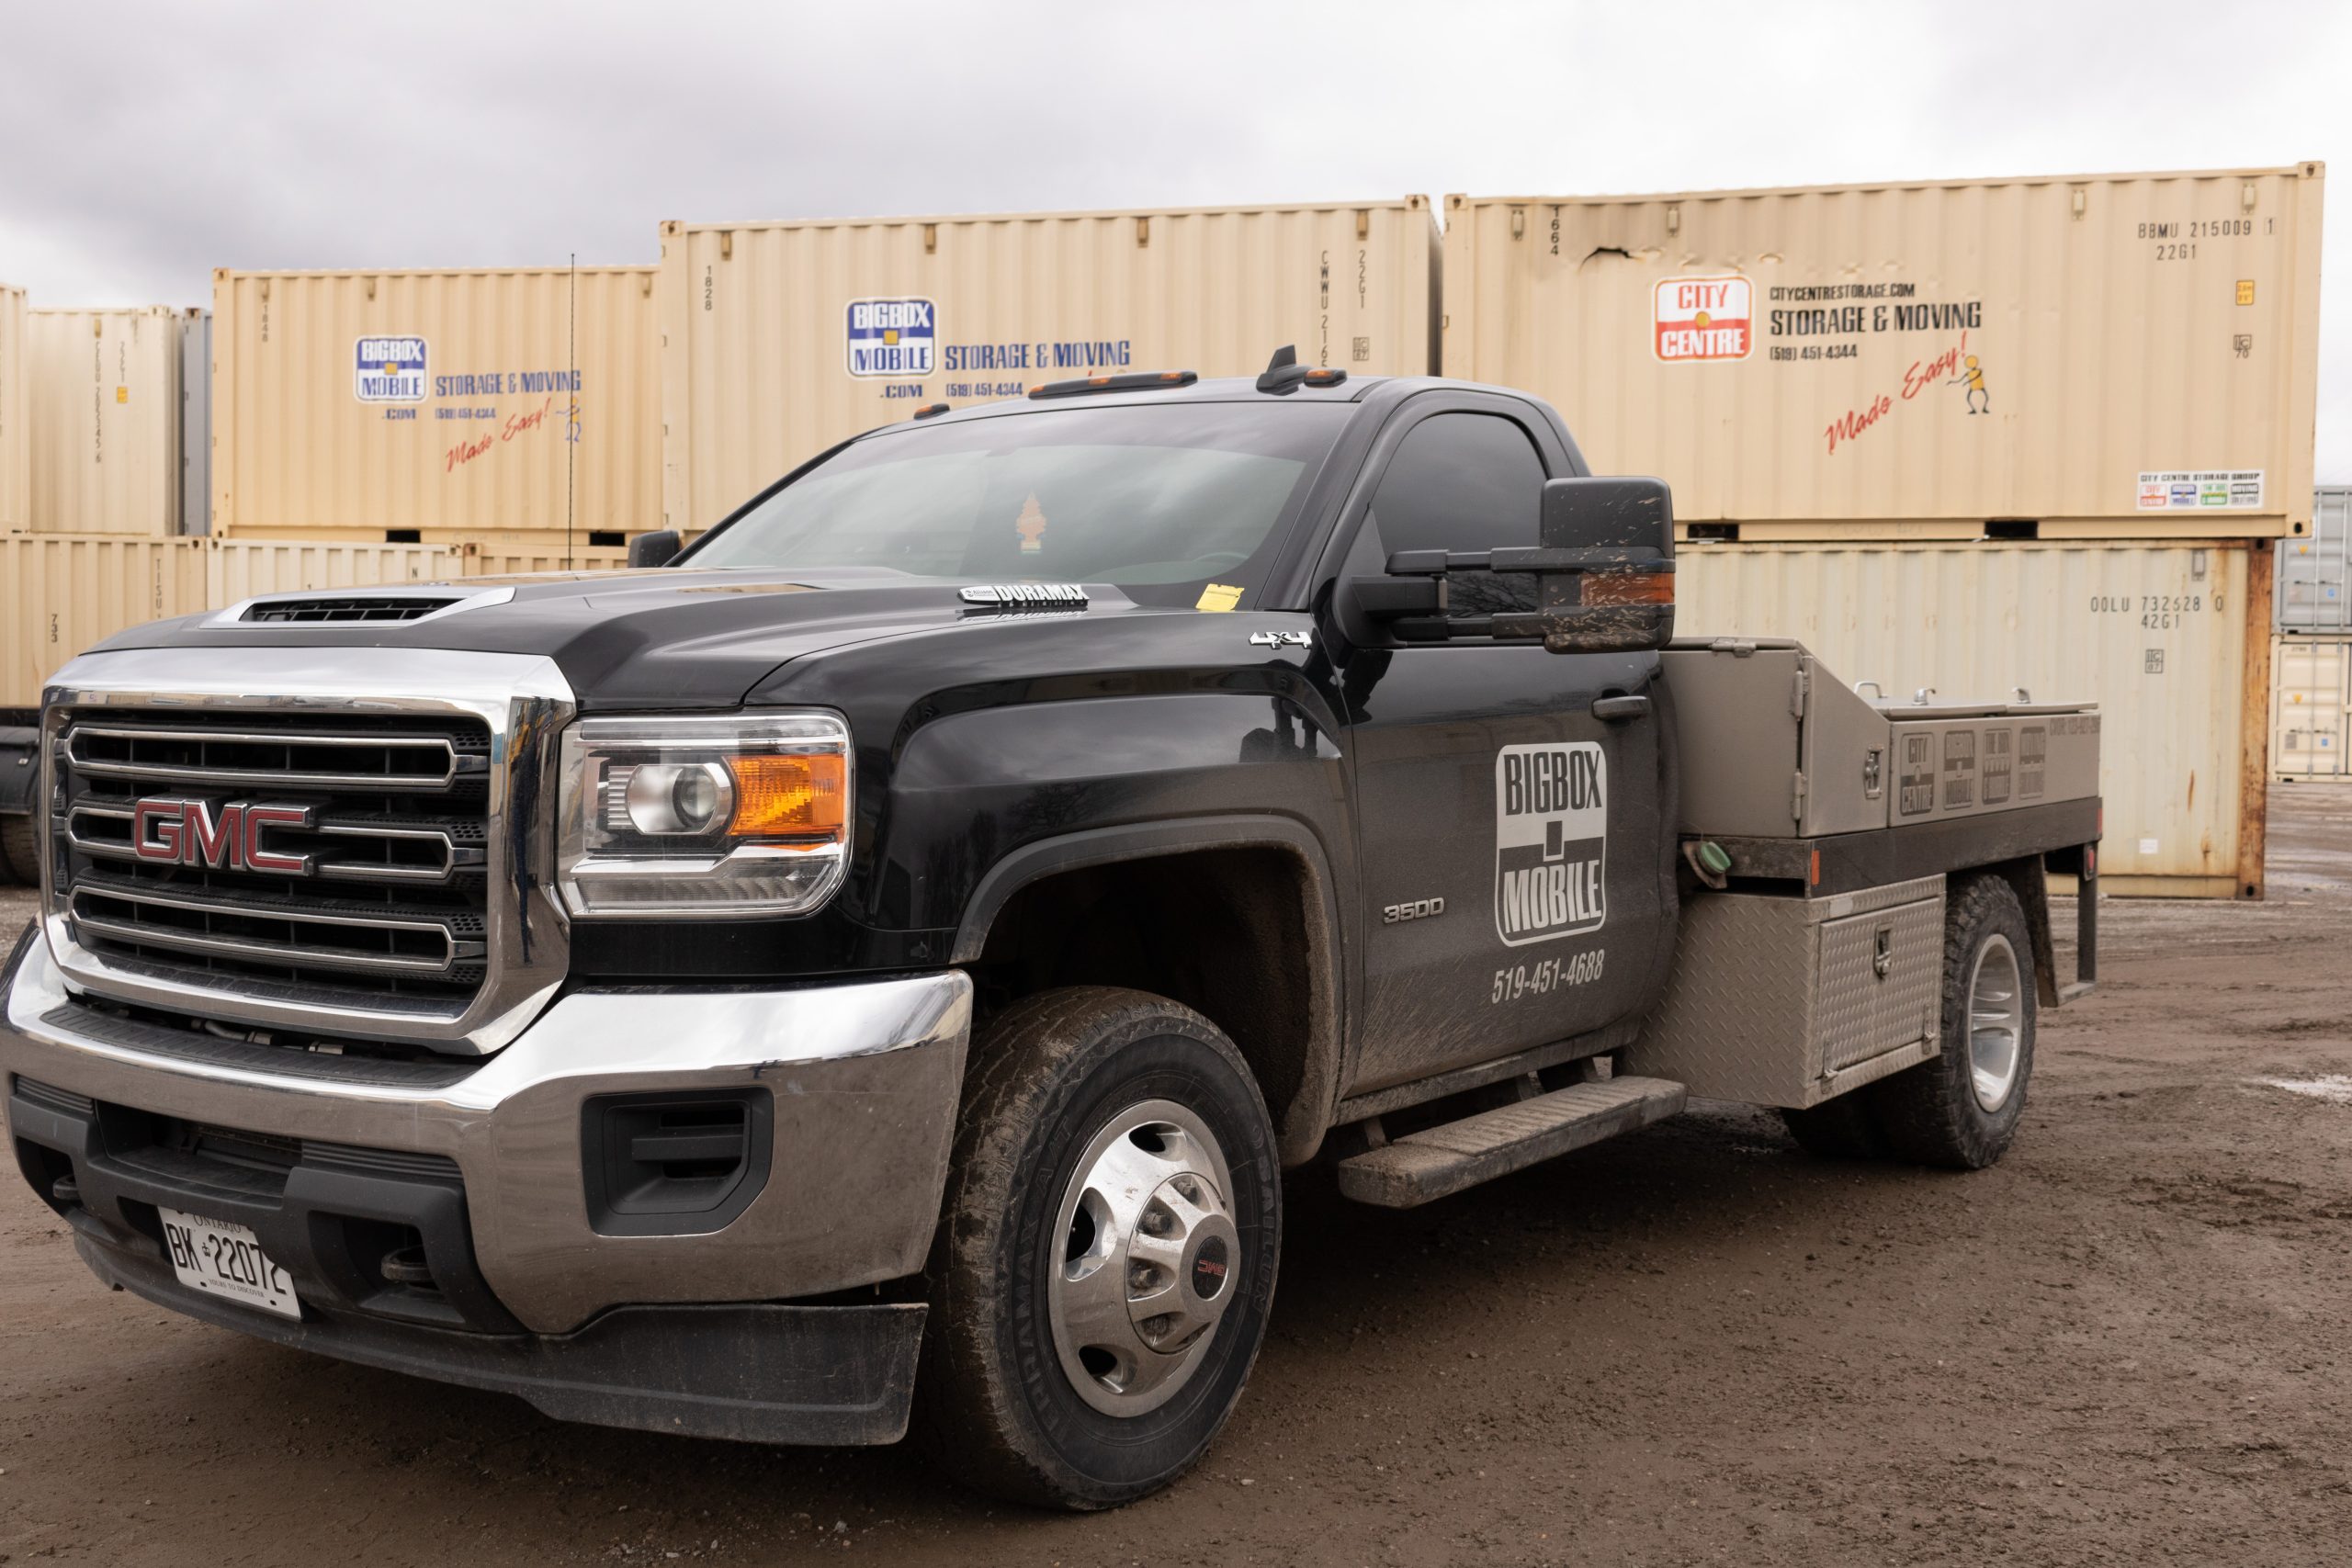 truck used to deliver mobile storage units in front of stacked shipping container storage bins